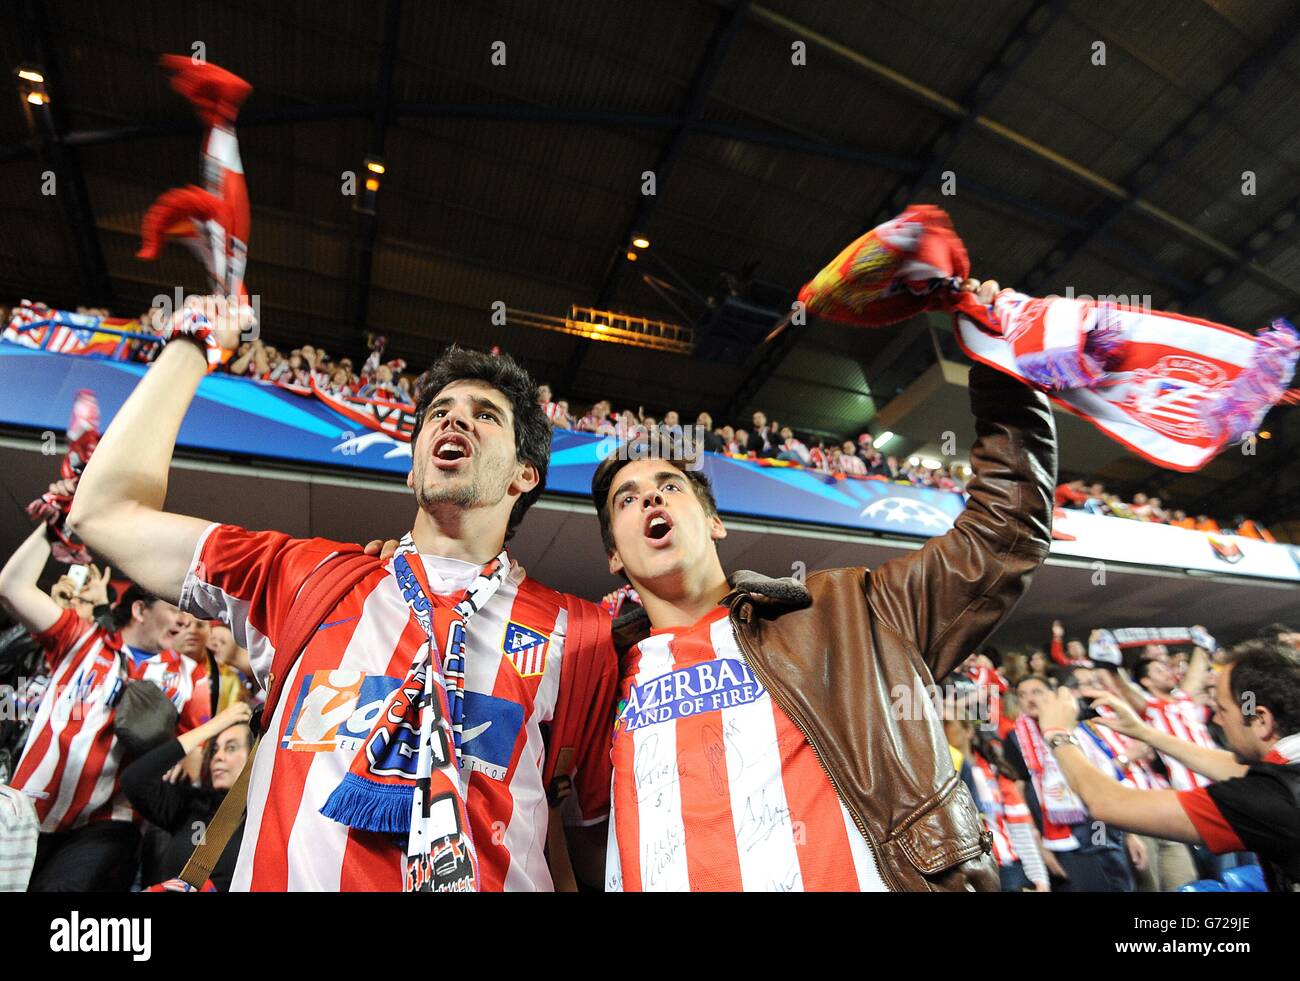 Soccer - UEFA Champions League - Semi Final - Second Leg - Chelsea v Atletico Madrid - Stamford Bridge. Atletico Madrid fans celebrate in the stands after the final whistle Stock Photo